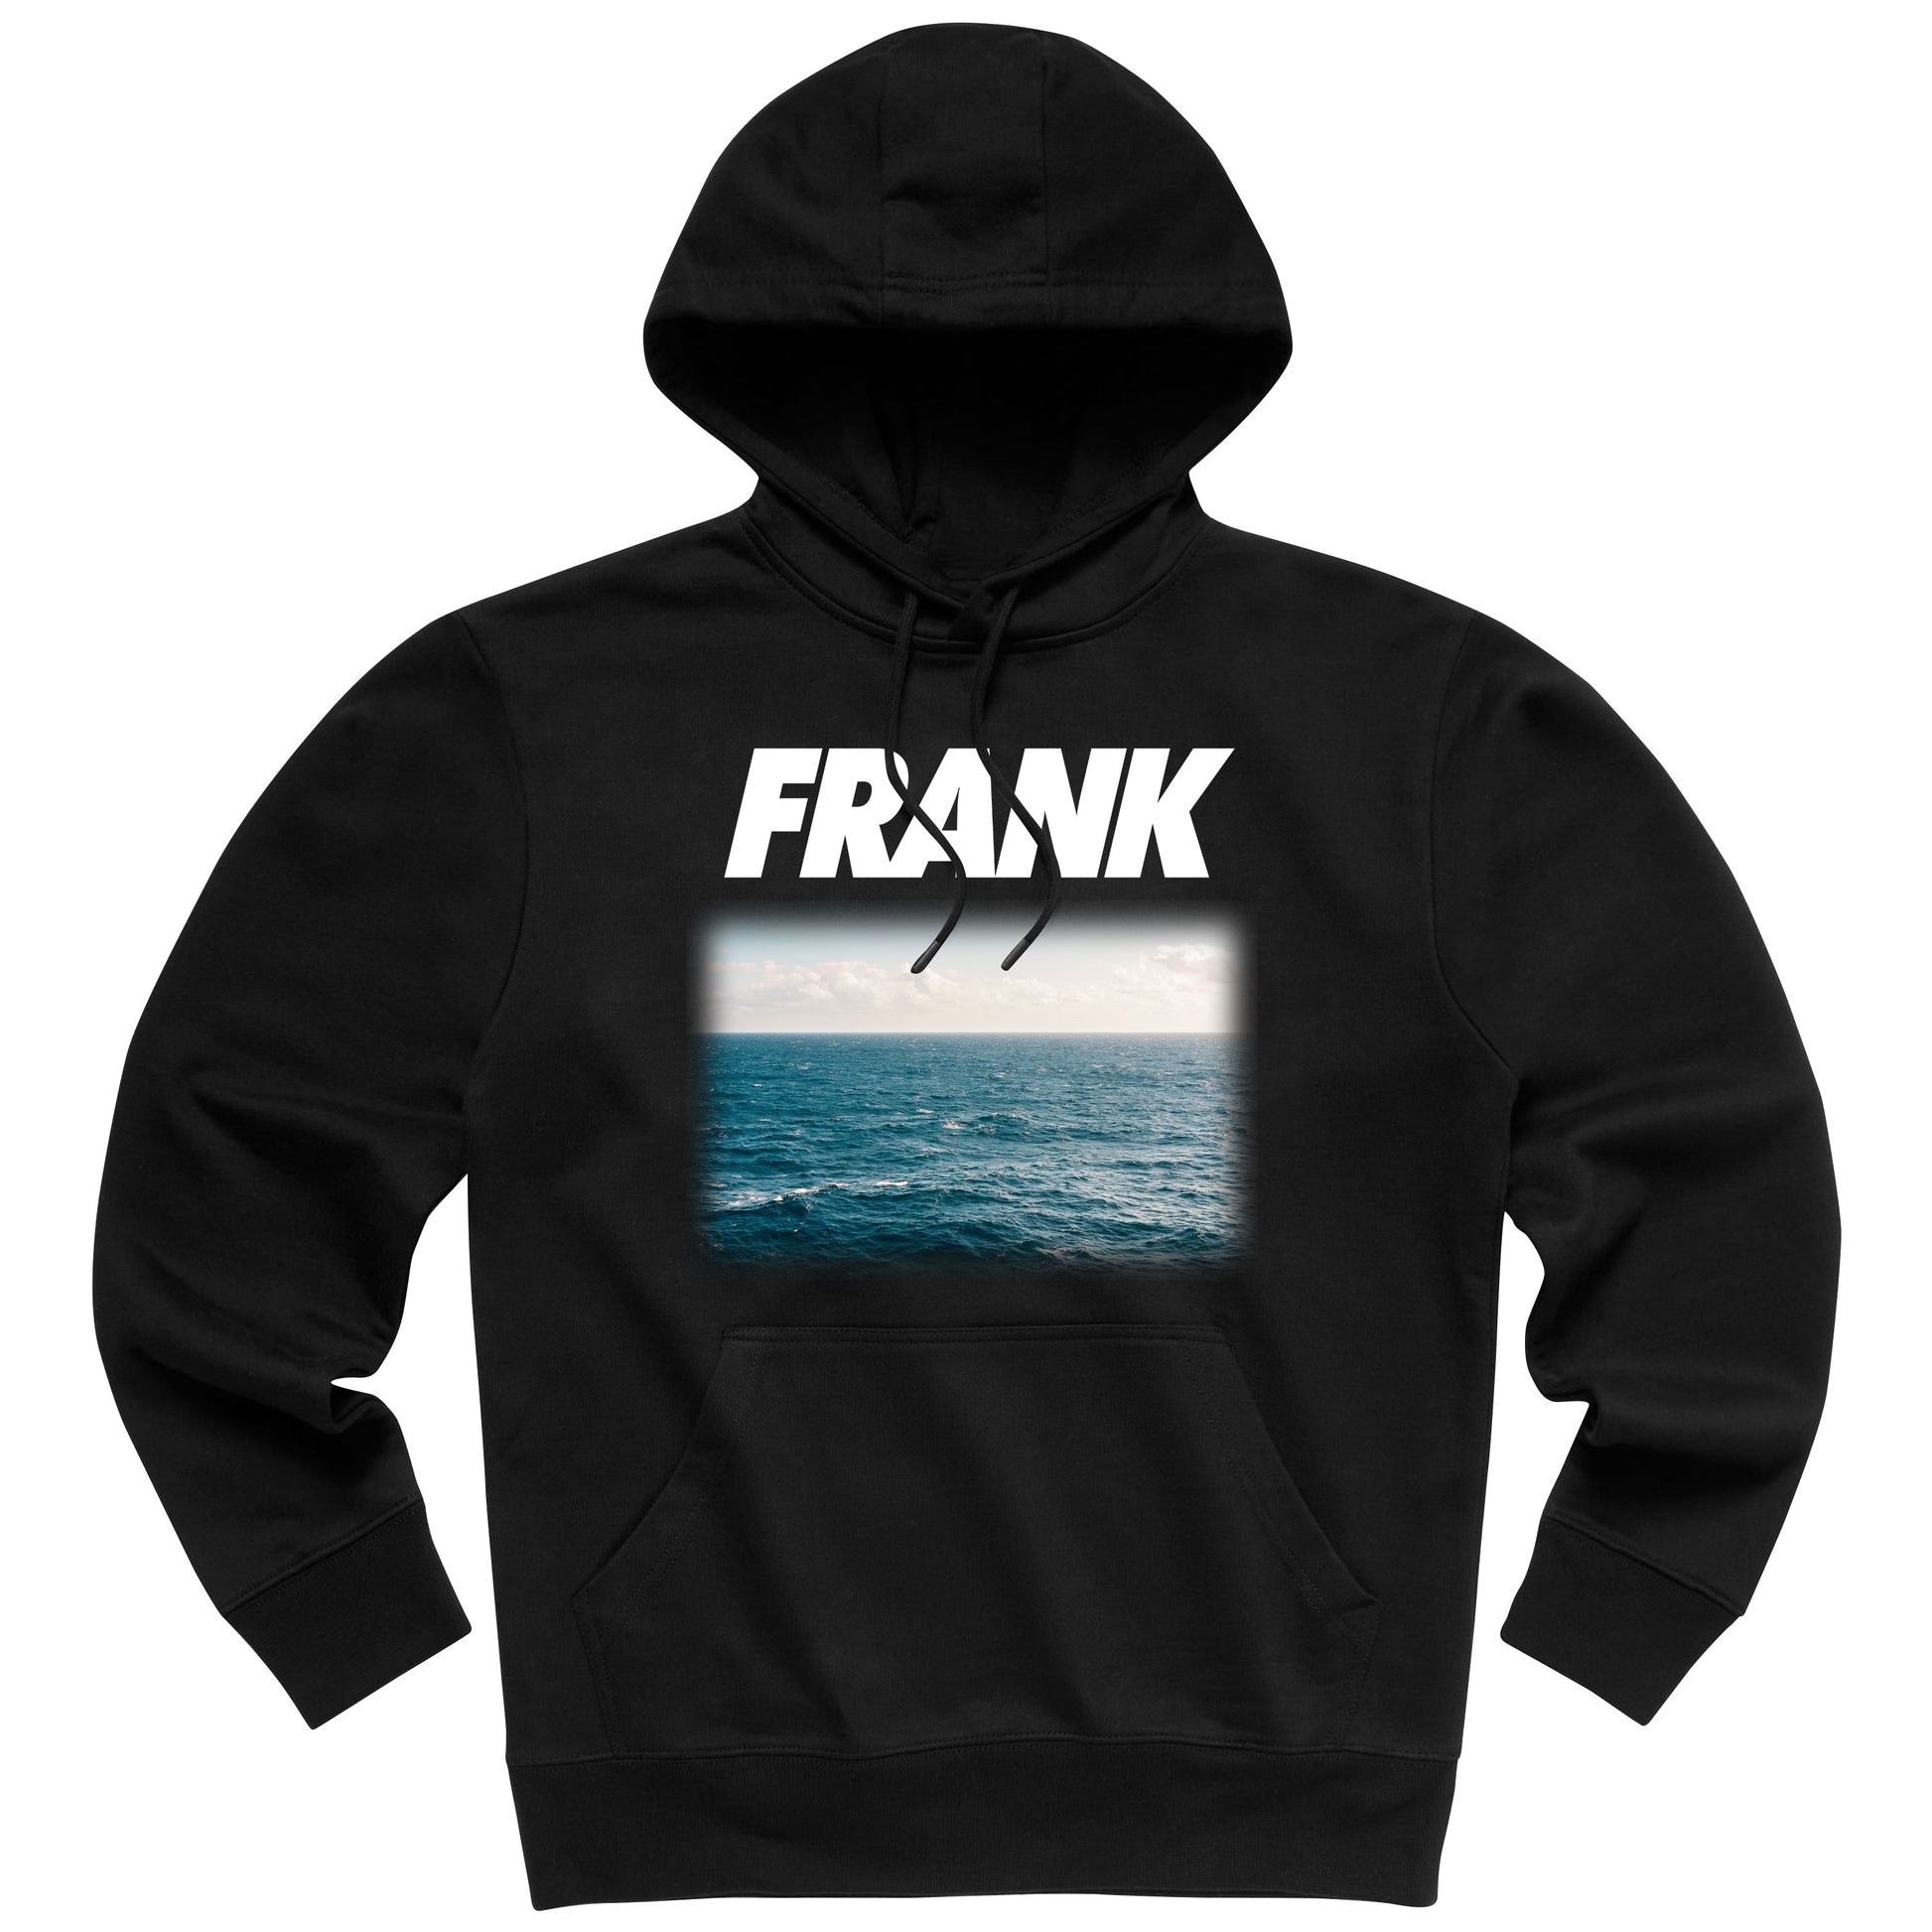 MARKET clothing brand FRANK HOODIE. Find more graphic tees, hats and more at MarketStudios.com. Formally Chinatown Market.